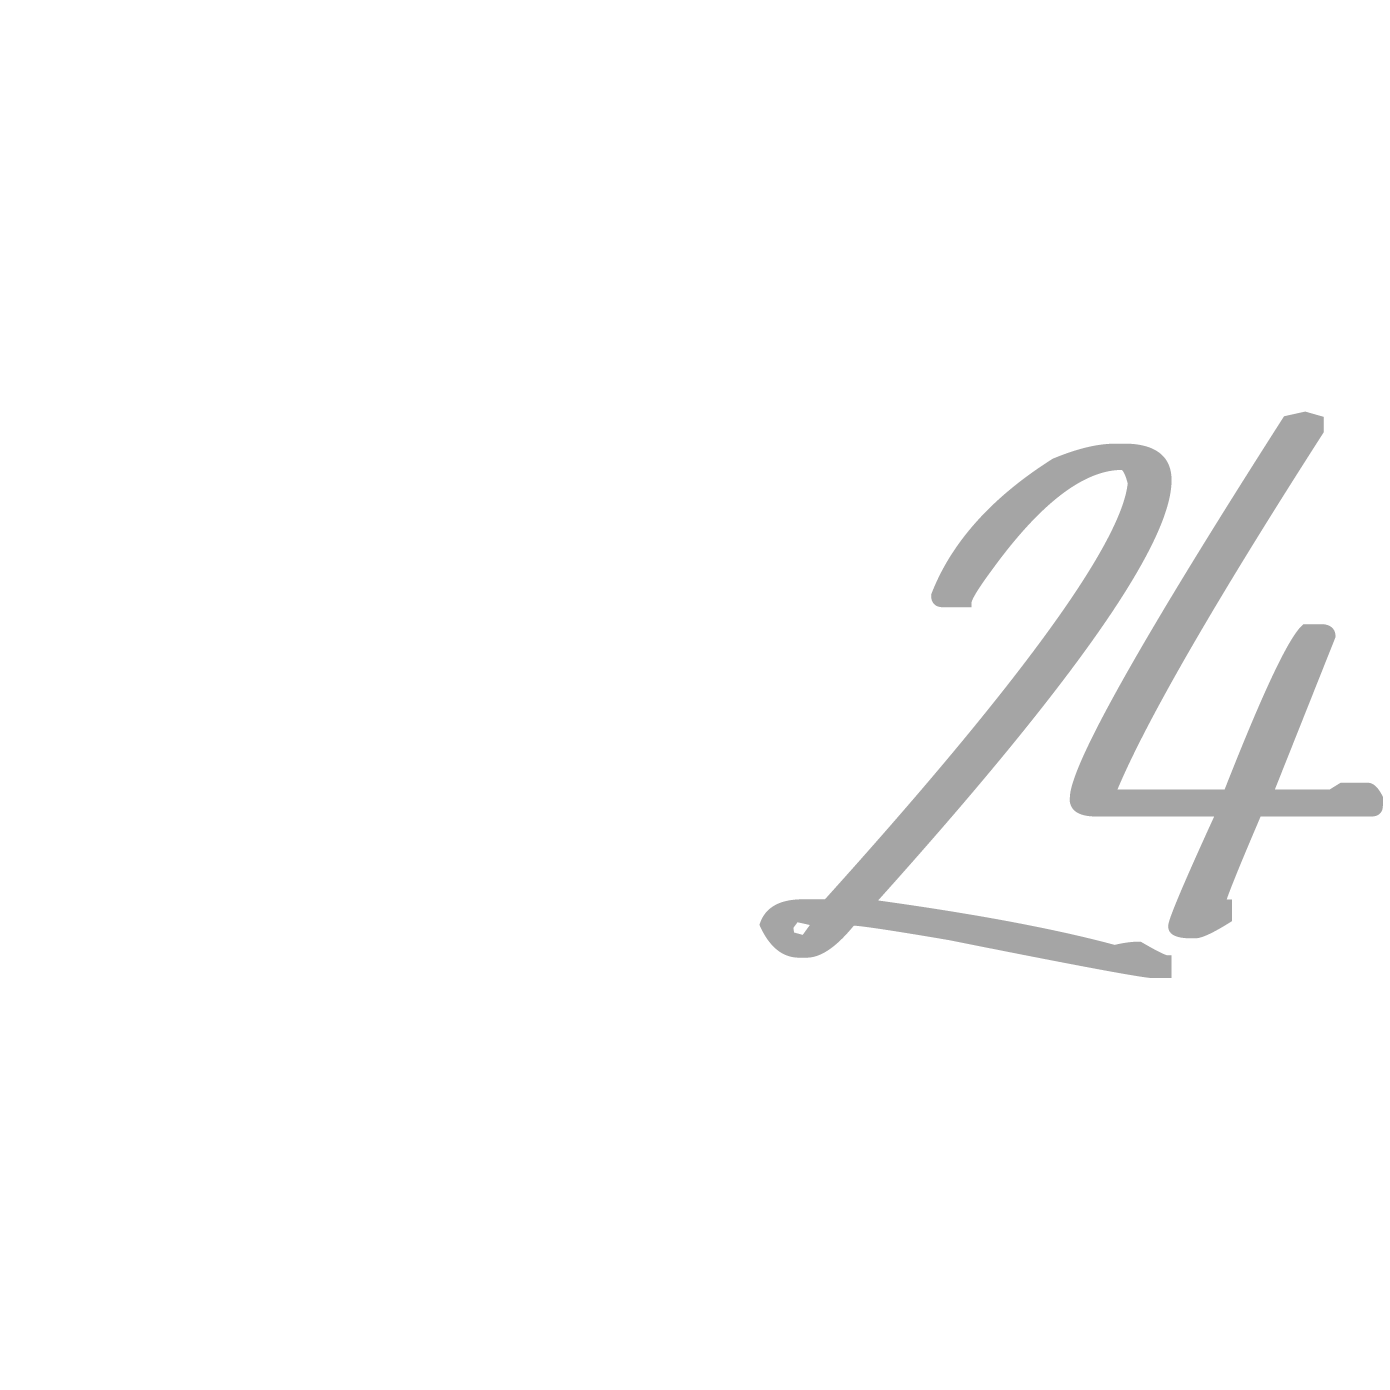 fast24.png